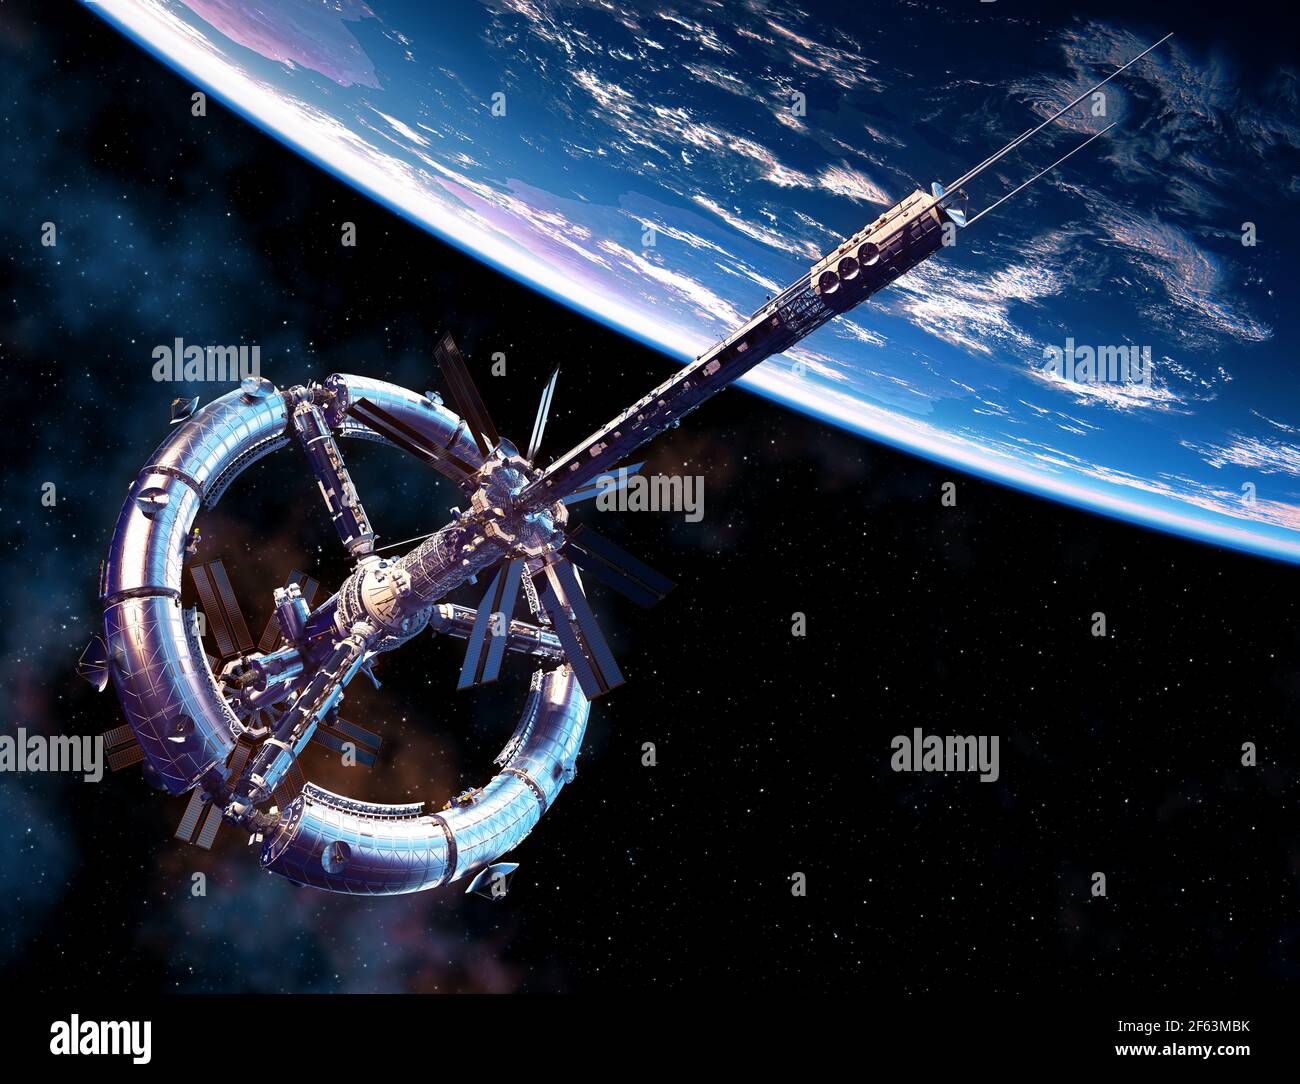 New Big Space Station Orbiting Blue Planet Earth Stock Photo